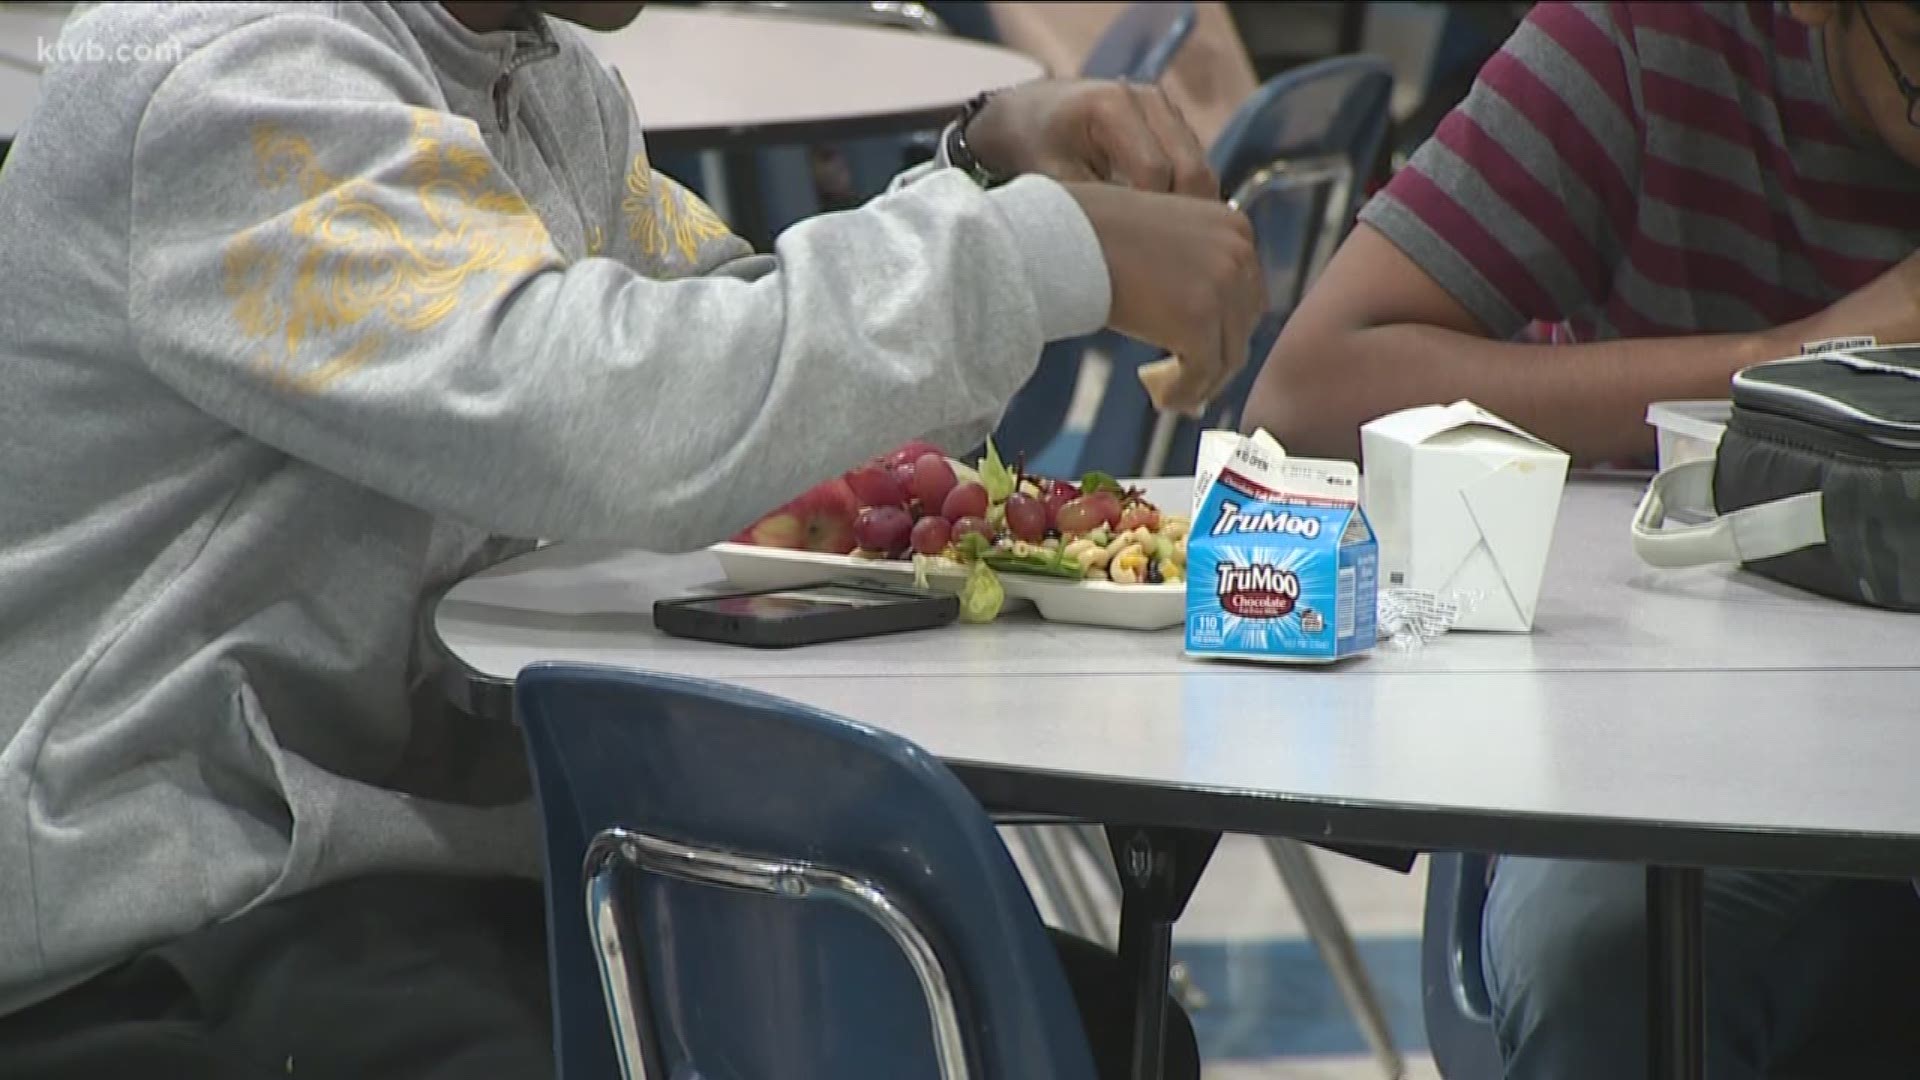 The generous act of kindness is helping families with students at Timberline High School in Boise.